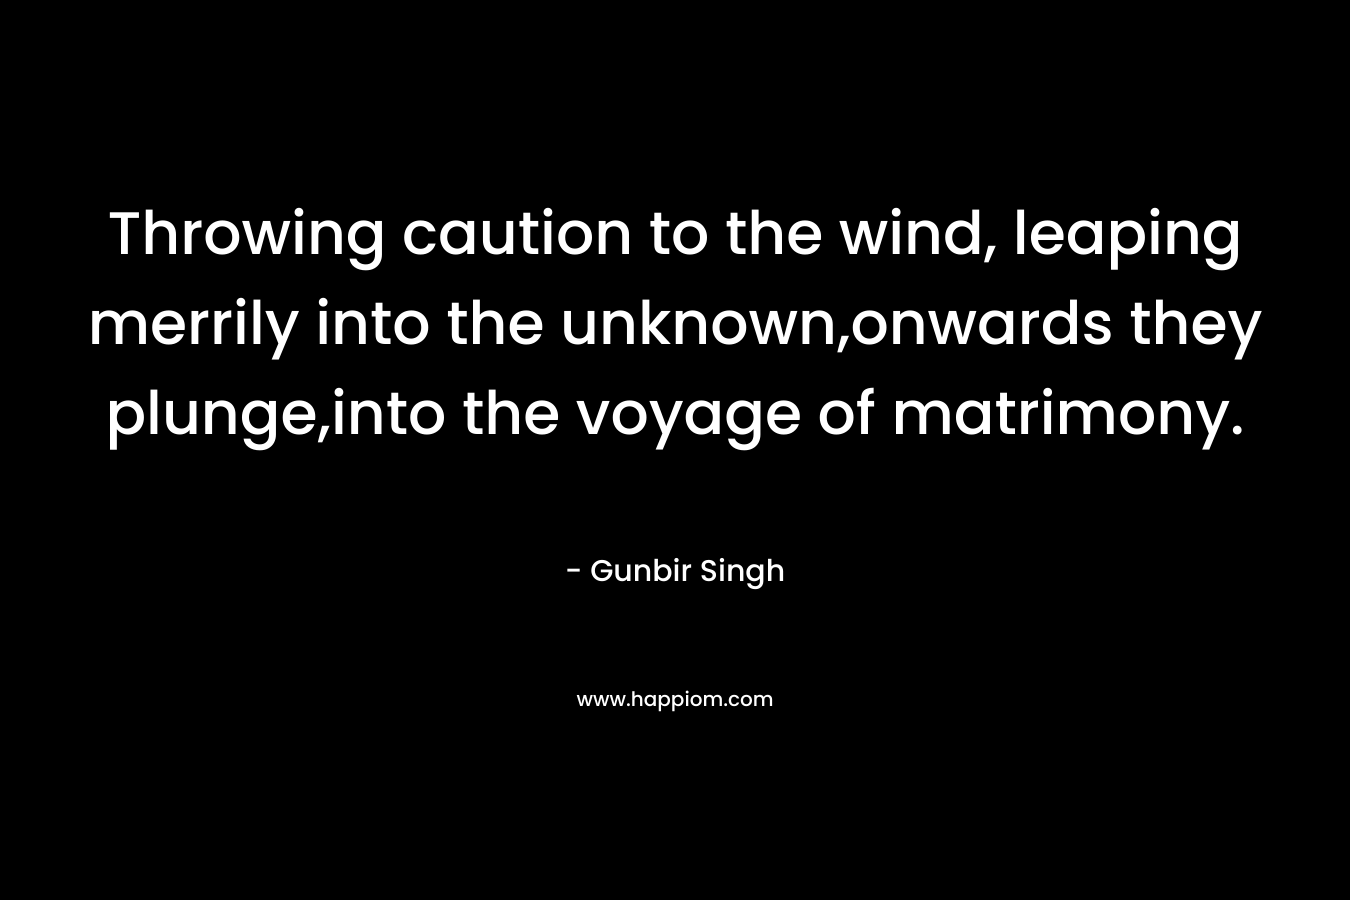 Throwing caution to the wind, leaping merrily into the unknown,onwards they plunge,into the voyage of matrimony. – Gunbir Singh